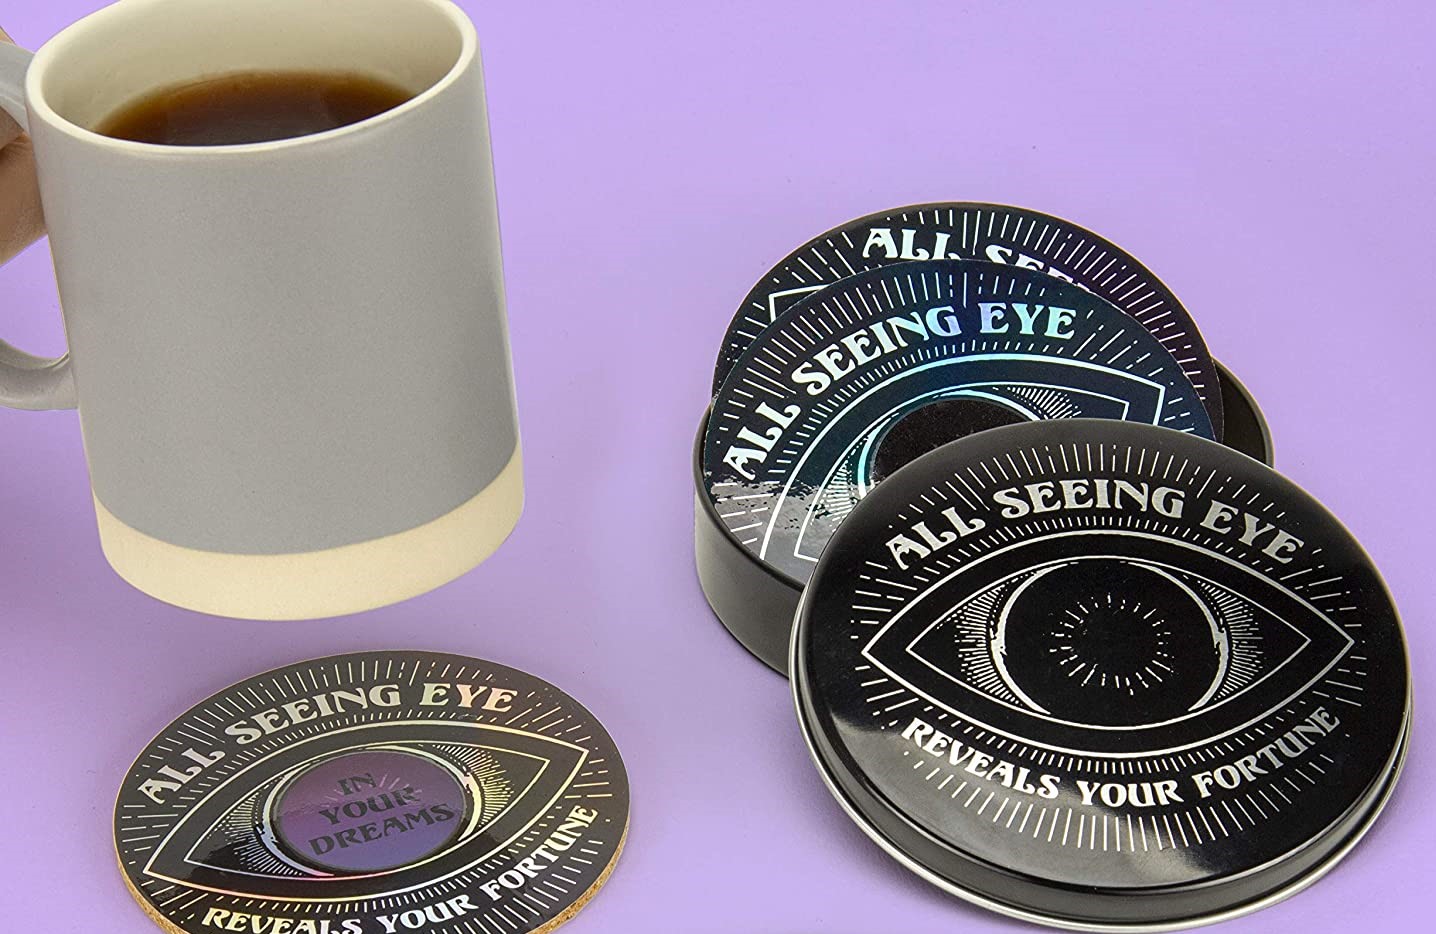 All Seeing Eye Coasters - Heat Changing Coasters that Reveal Your Fortune